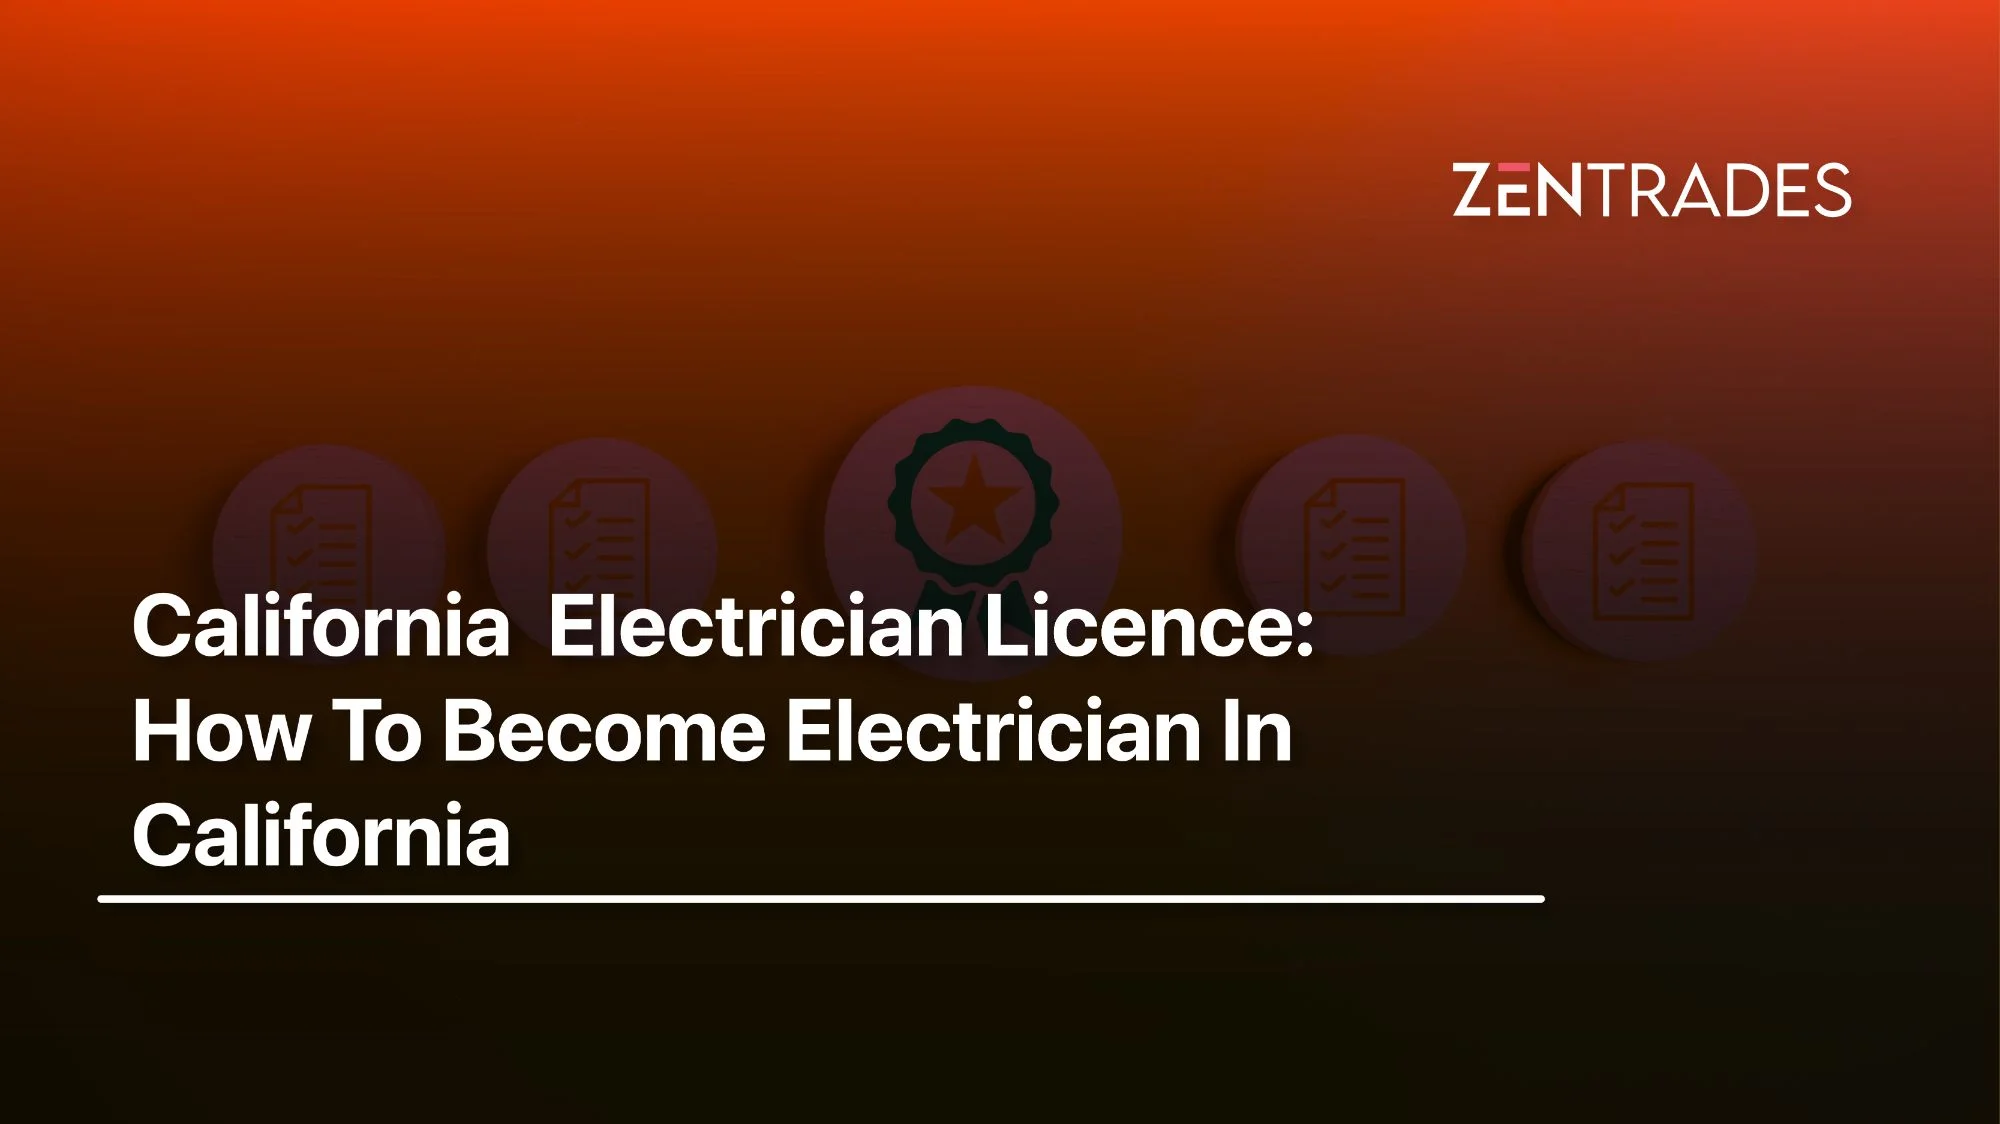 California Electrician License: Steps To Become A Certified Electrician In California